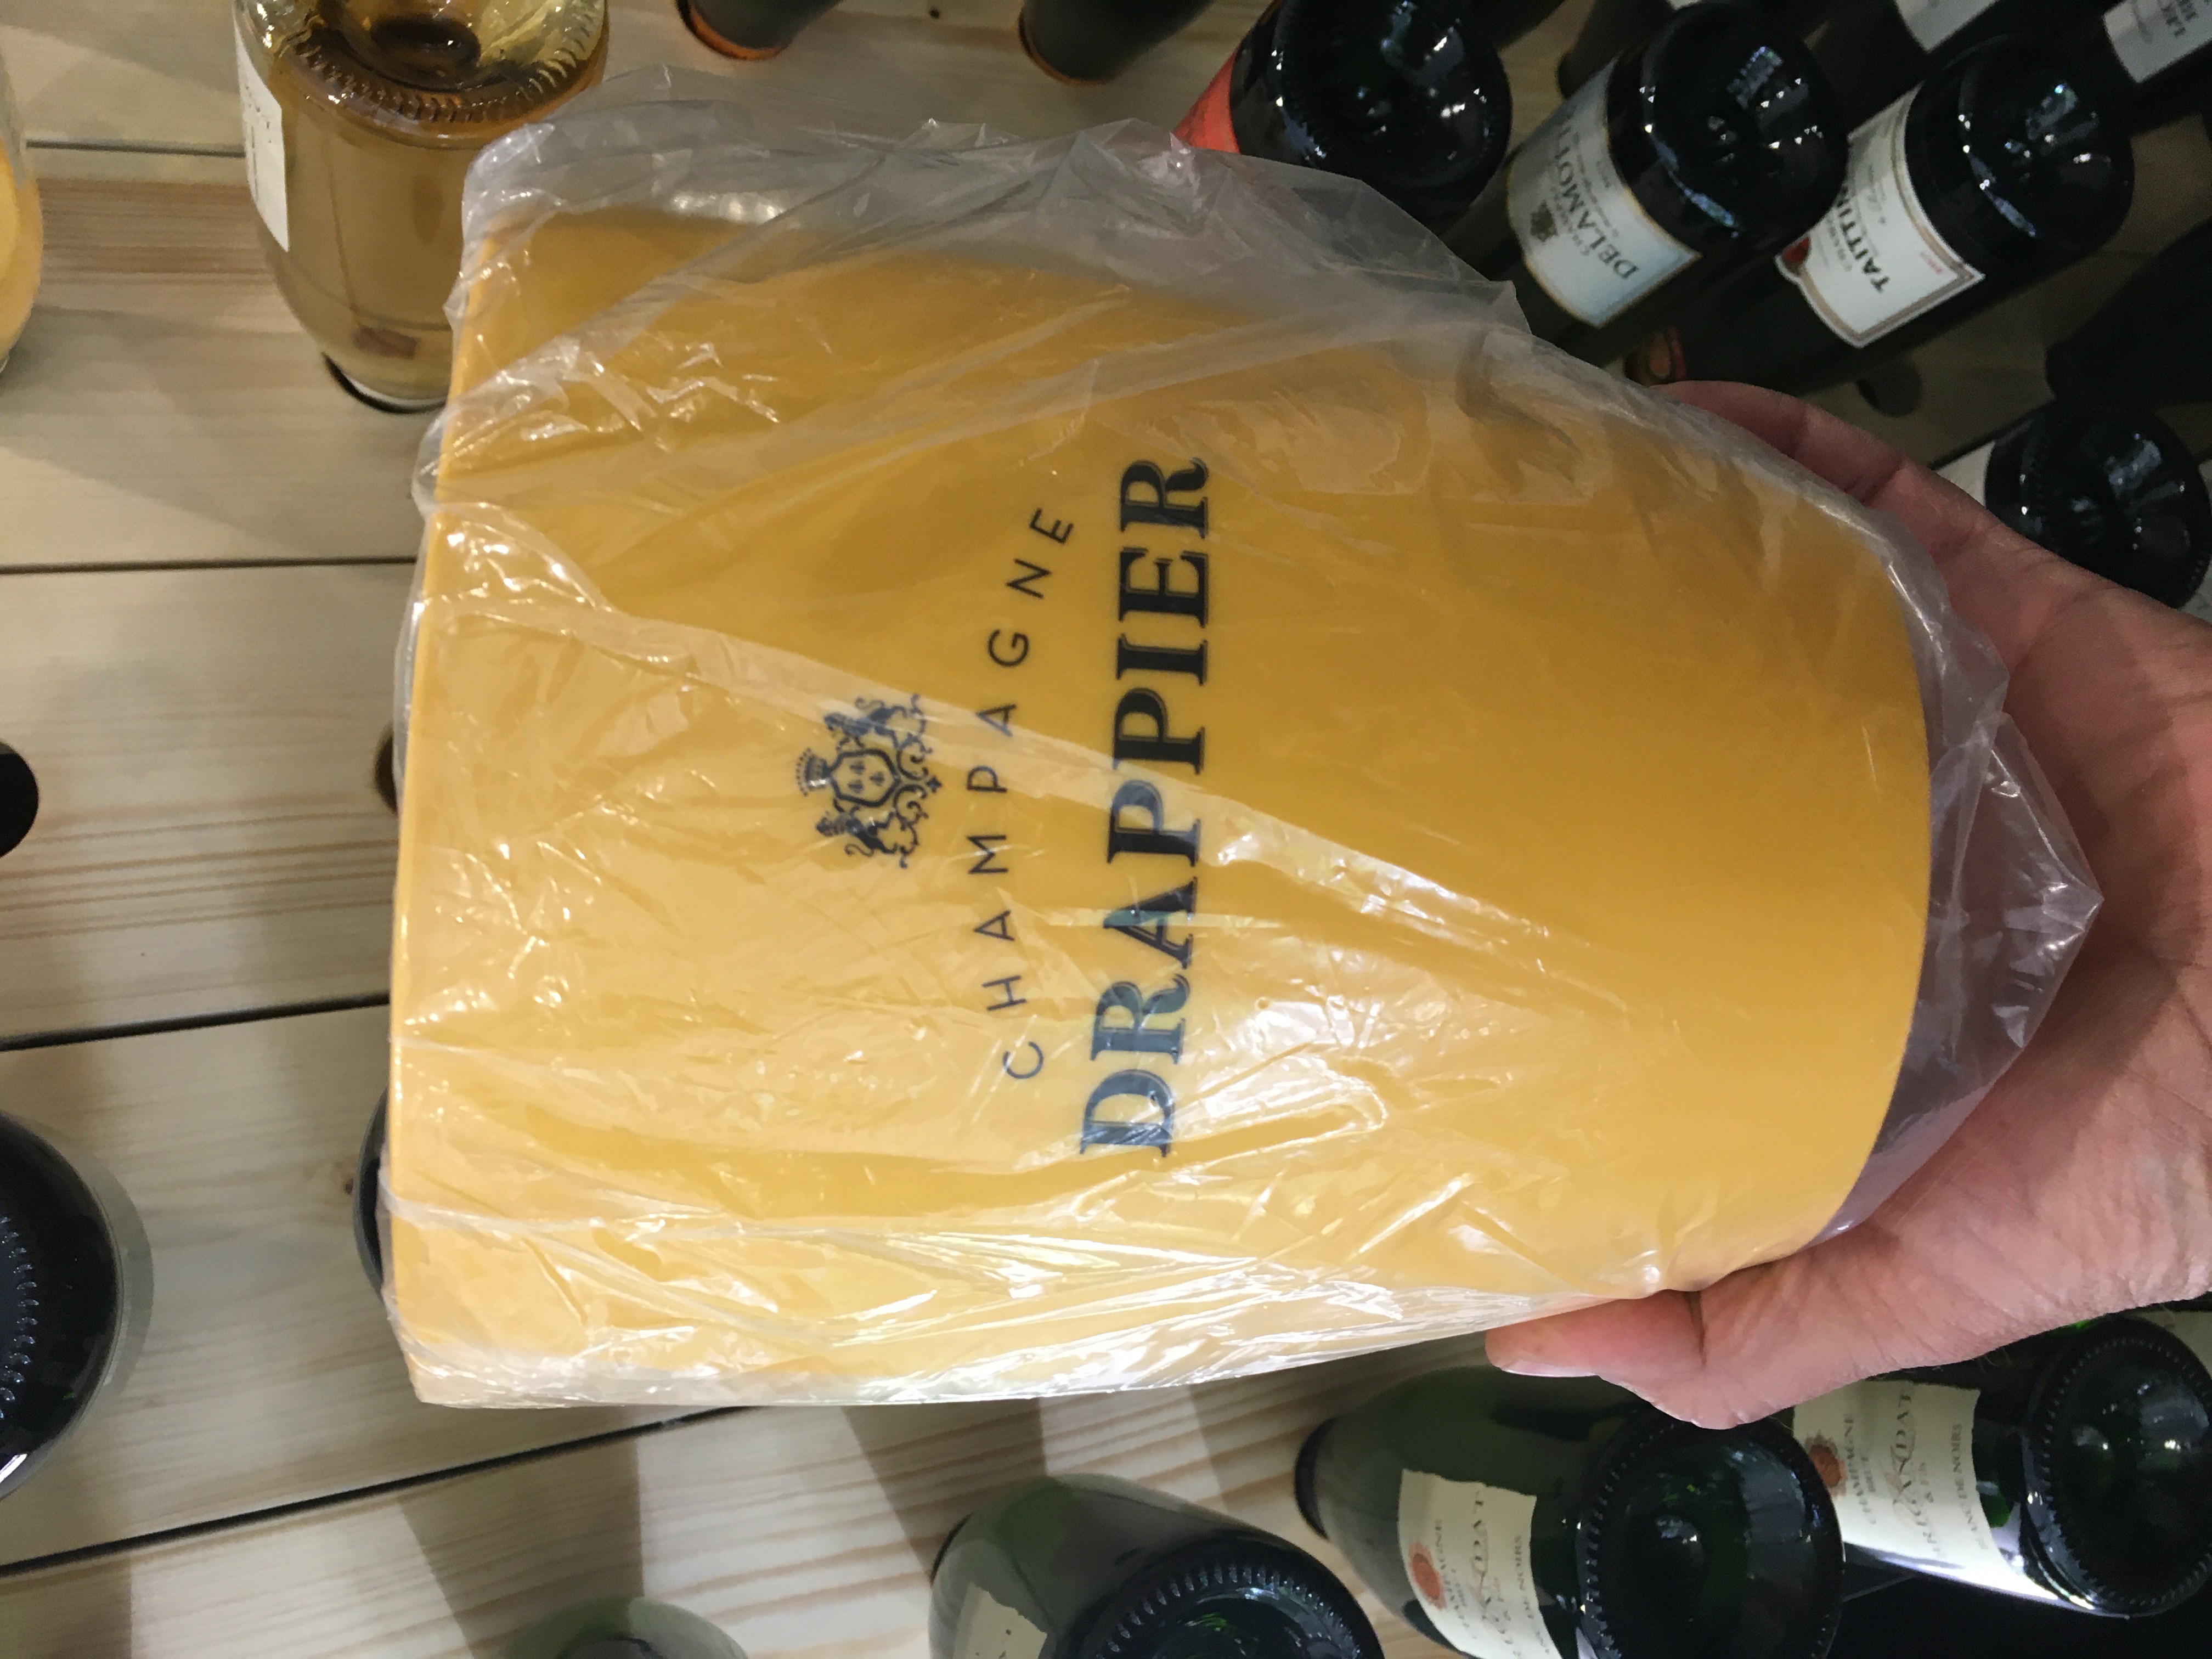 drappier_champagne_yellow_ice_bucket_cooler_for_sale_champagneclub_9.JPG